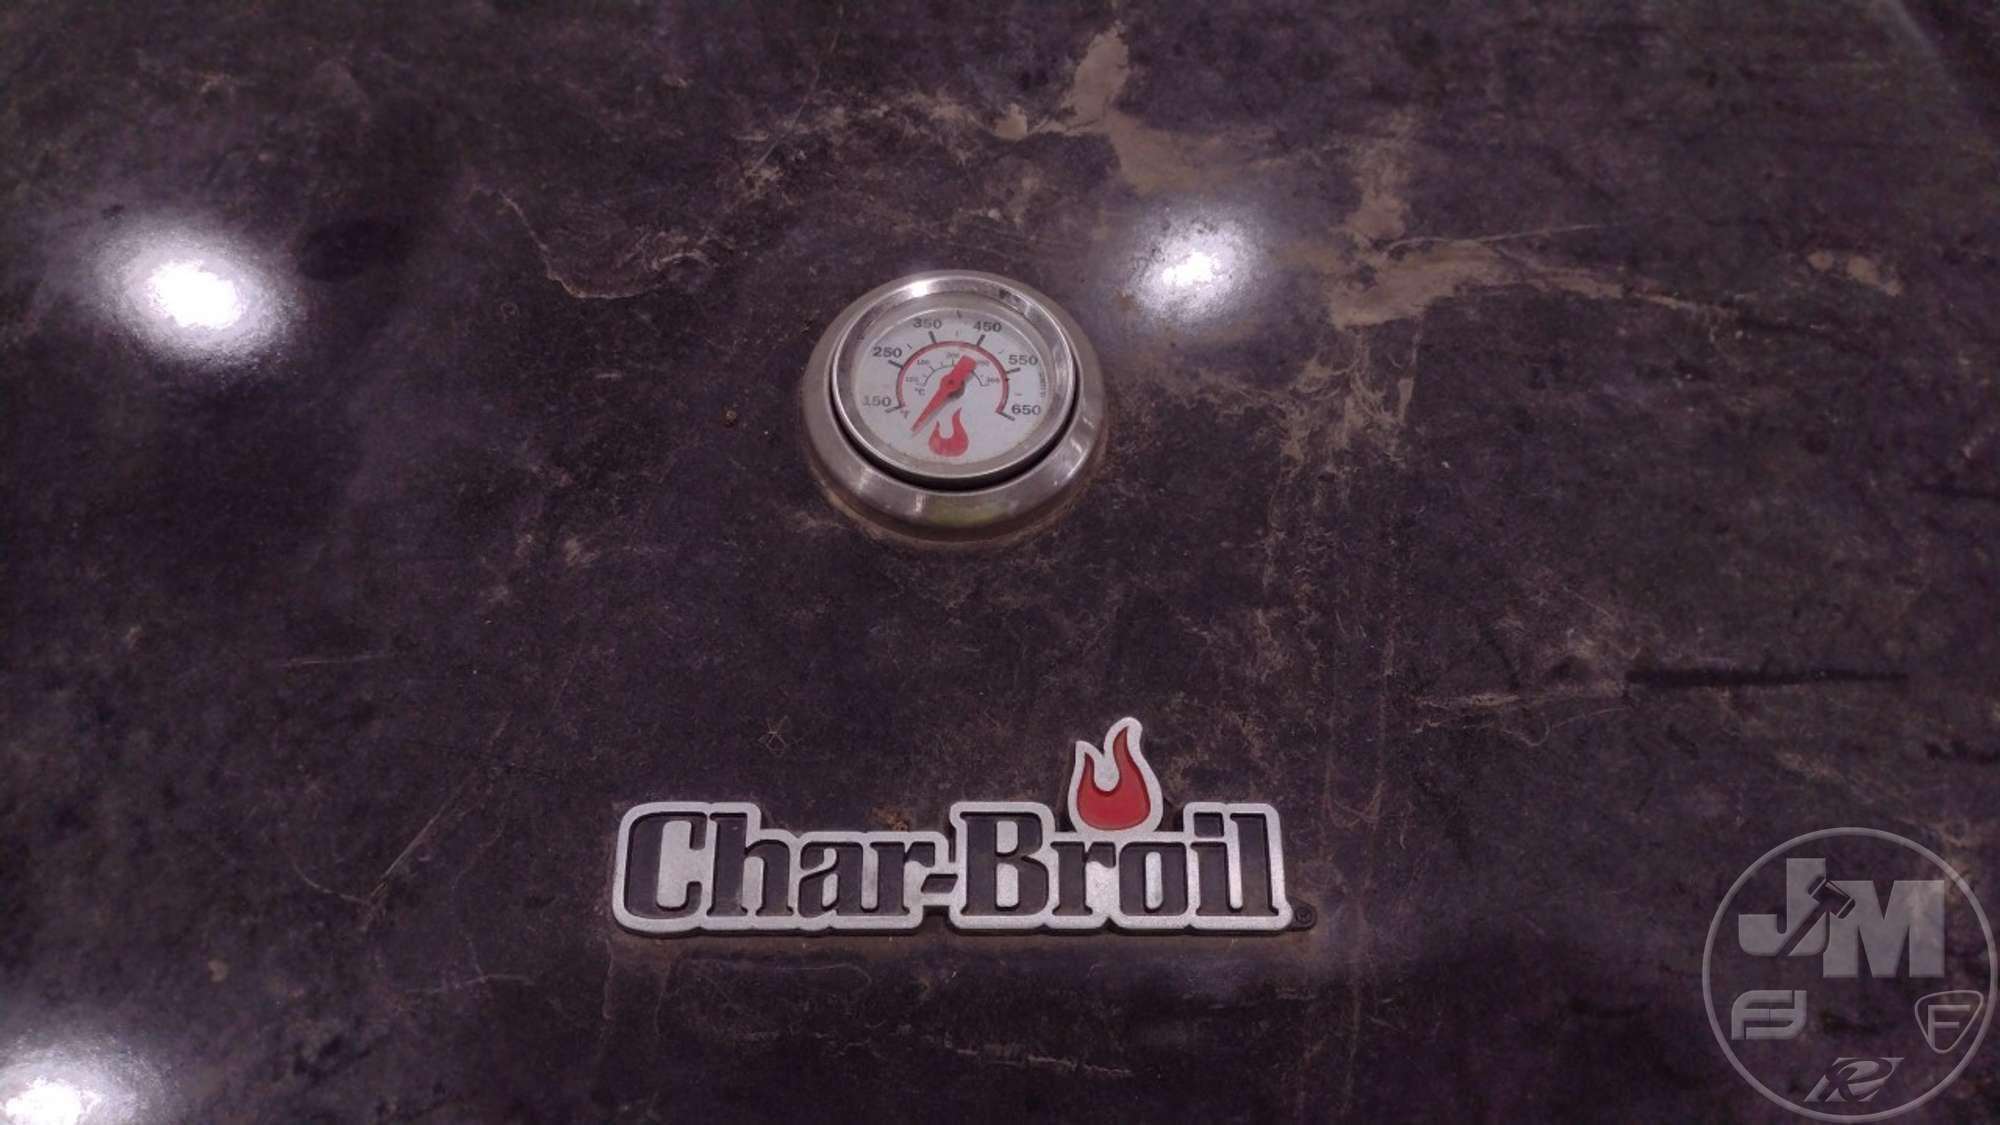 CHARBROIL PERFORMANCE GAS GRILL, 4 BURNERS